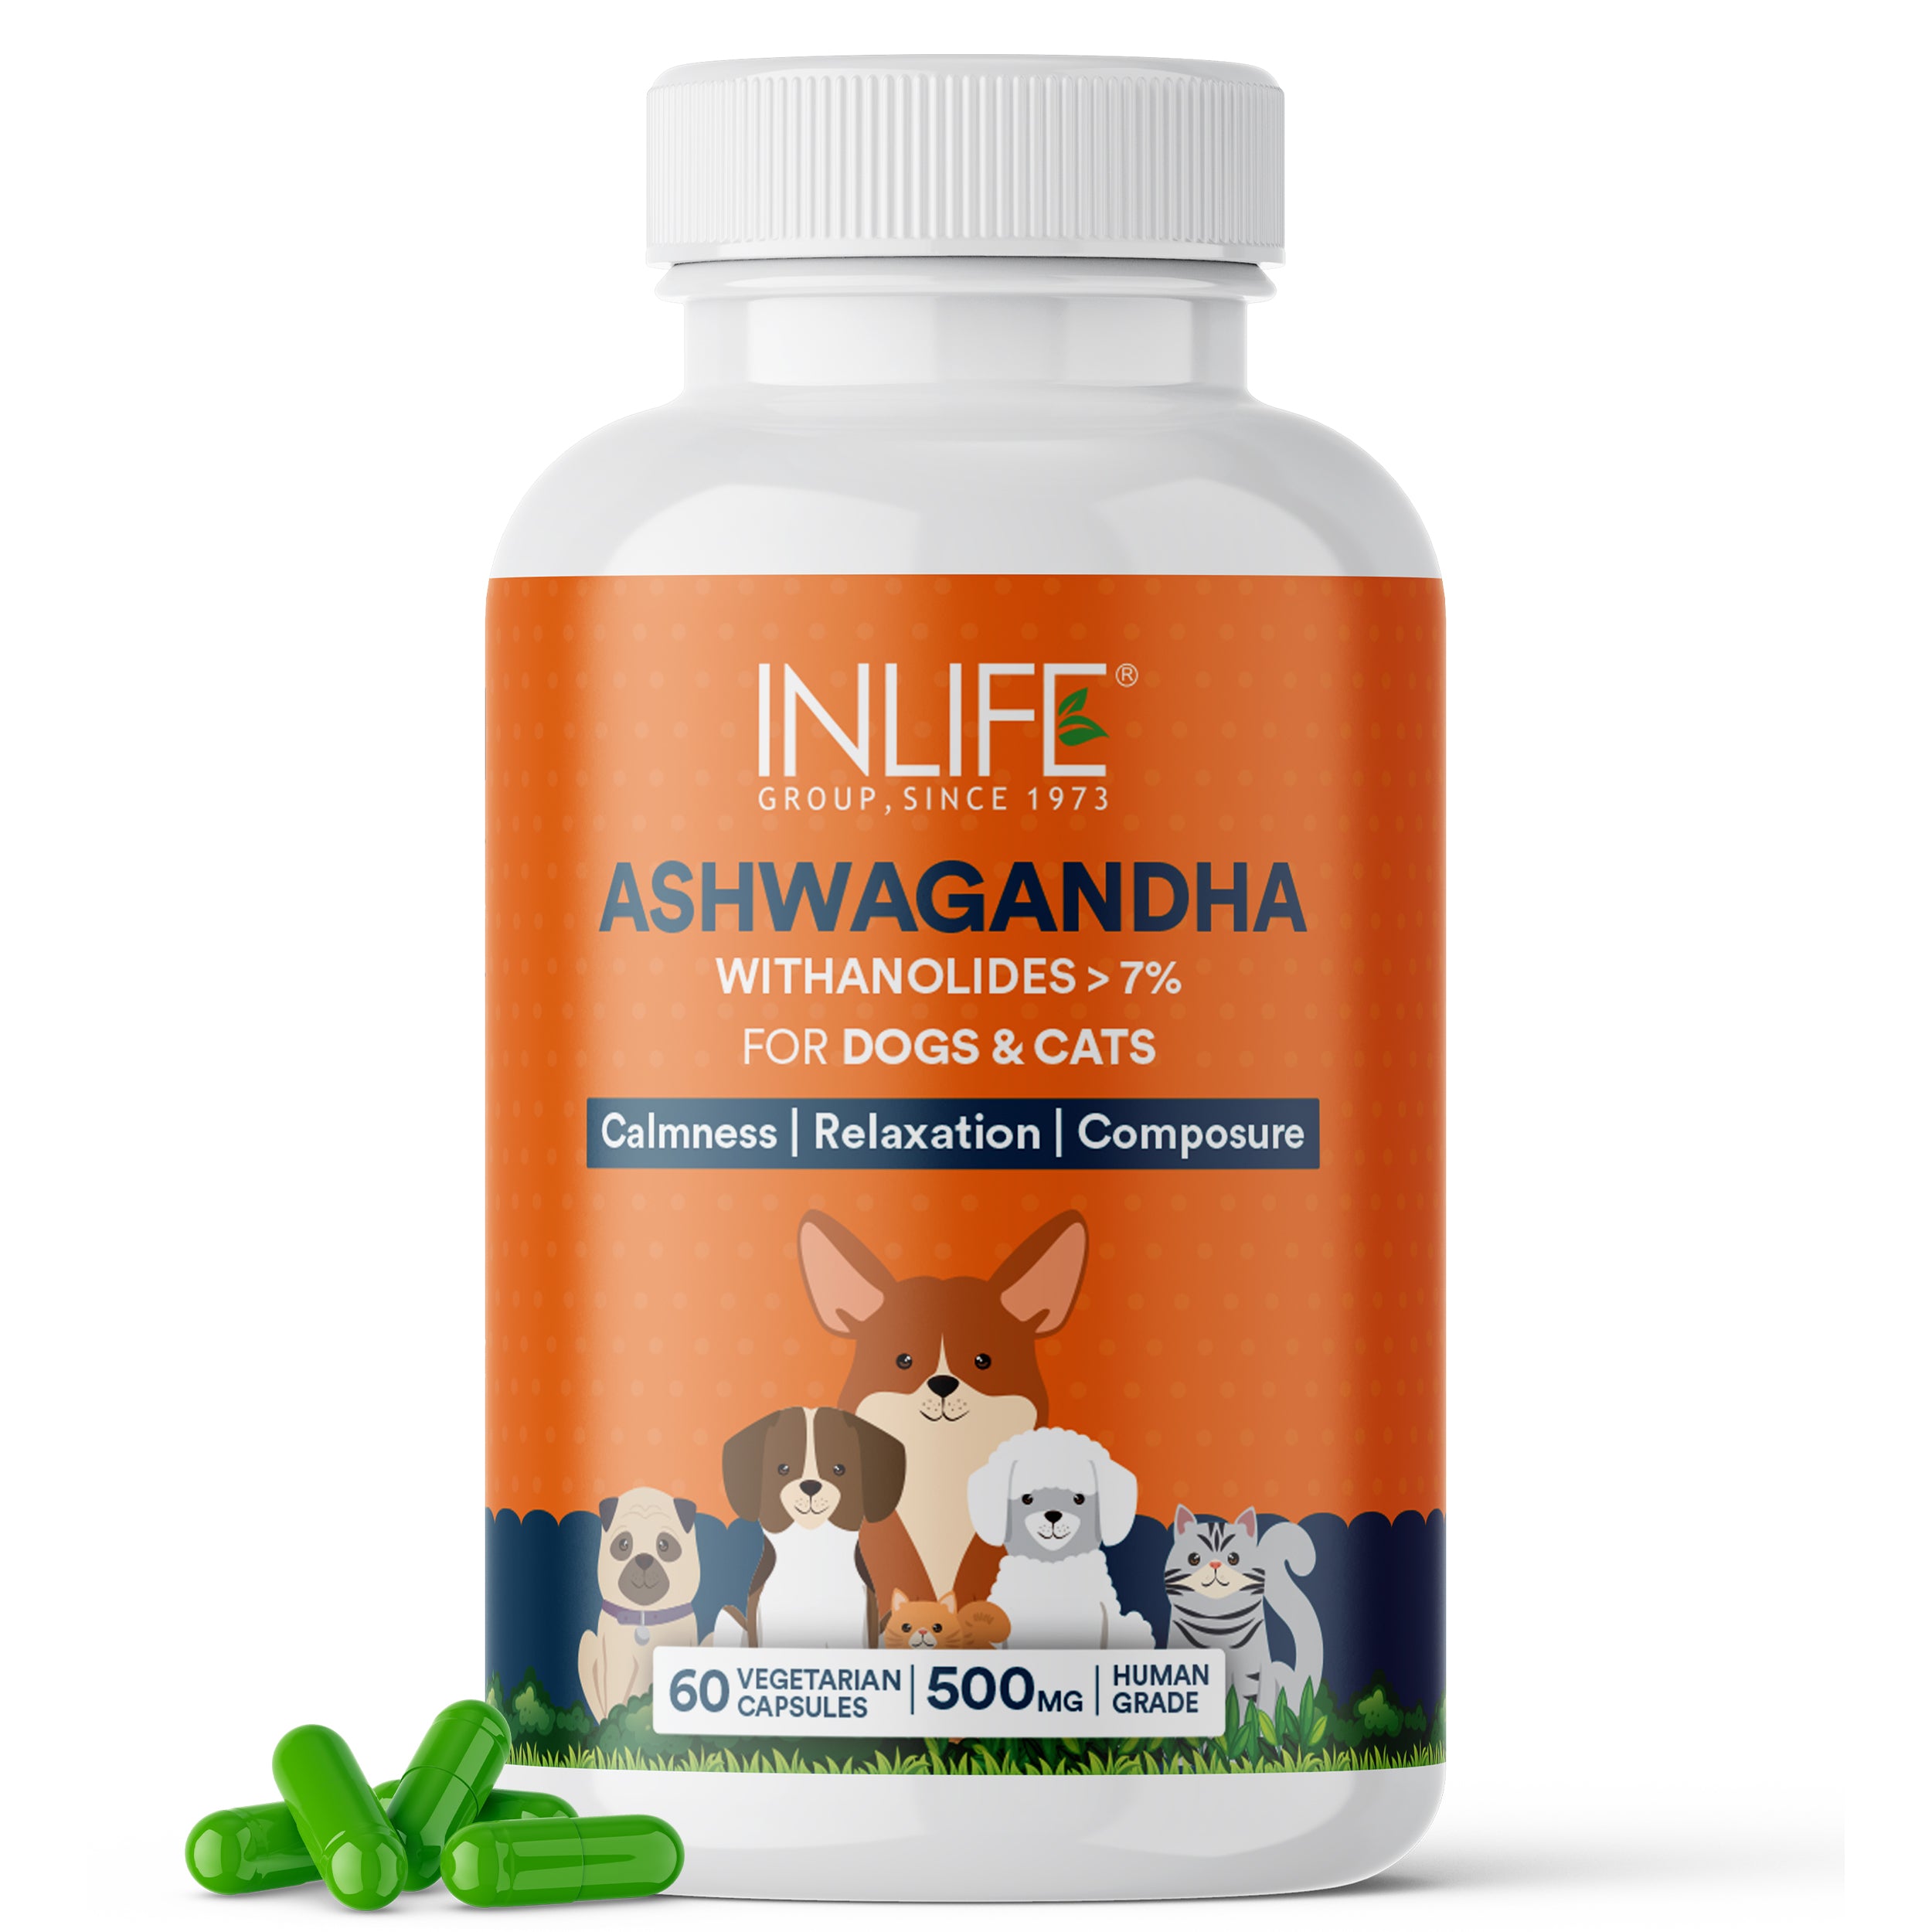 INLIFE Ashwagandha for Pets, Dogs & Cats | Relaxation , Calmness | 500mg | 60 Vegetarian Capsules